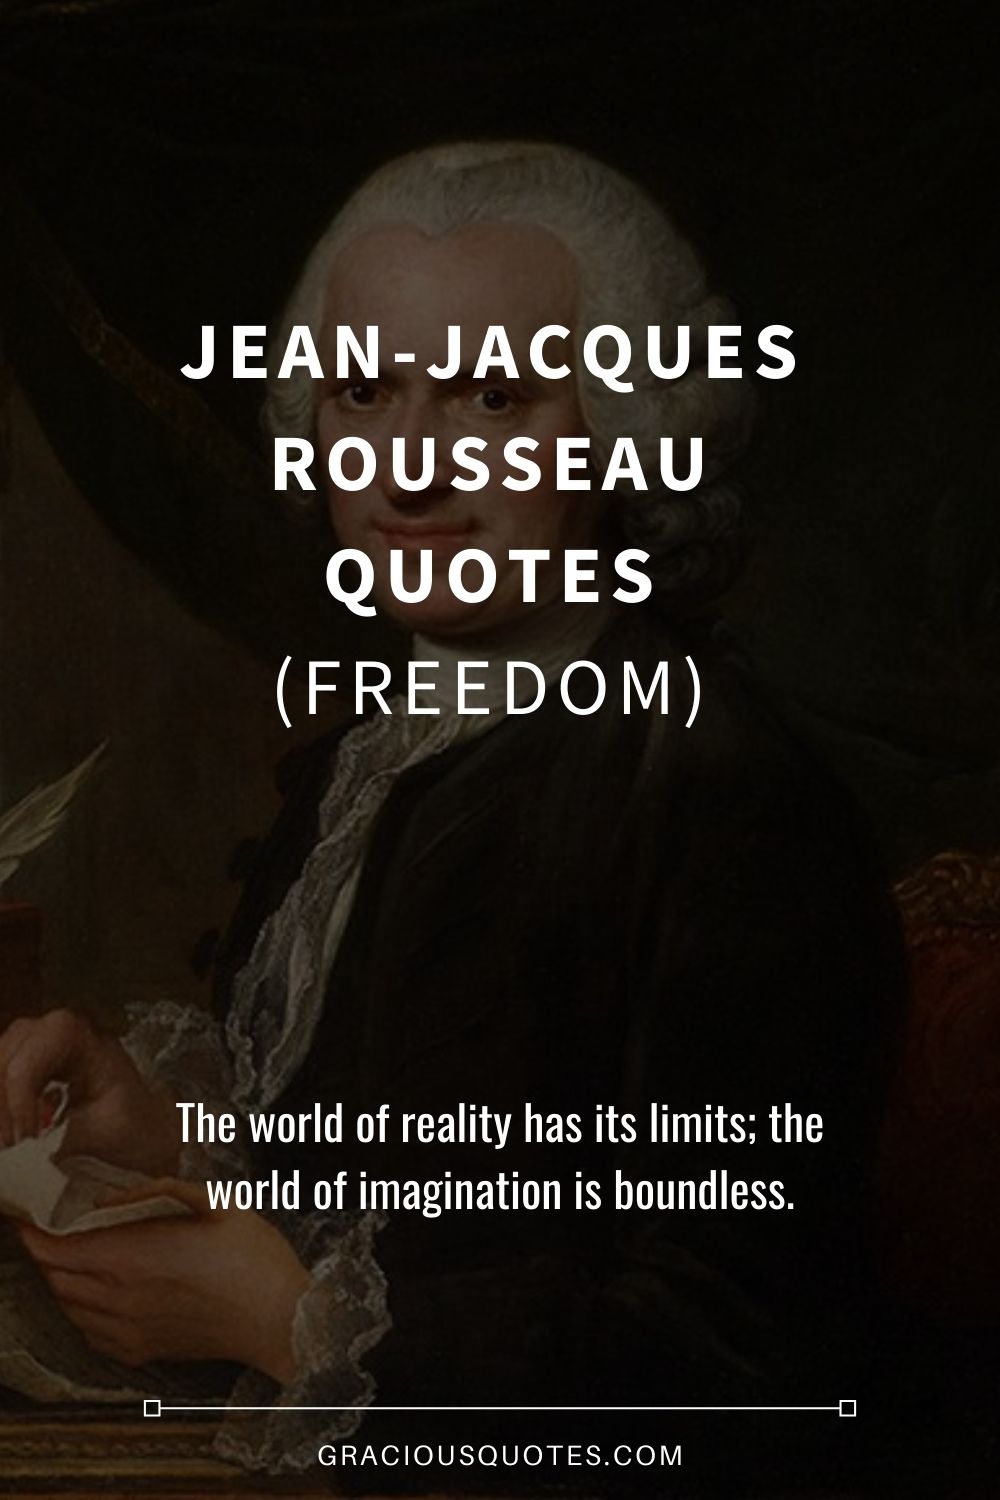 Jean-Jacques Rousseau Quotes (FREEDOM) - Gracious Quotes